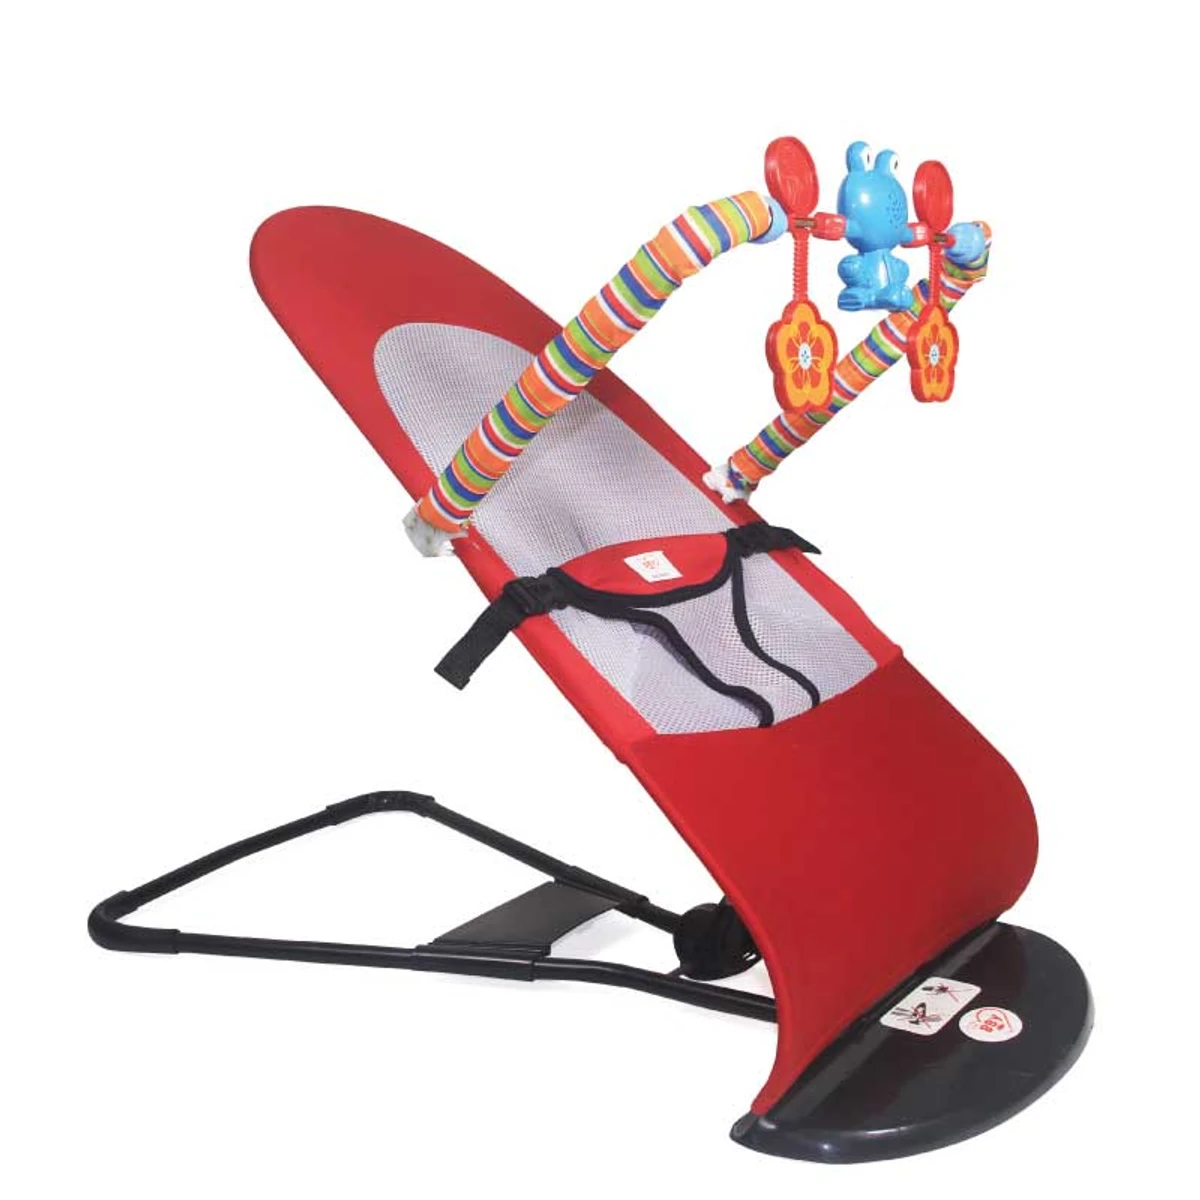 baby bouncer with toy